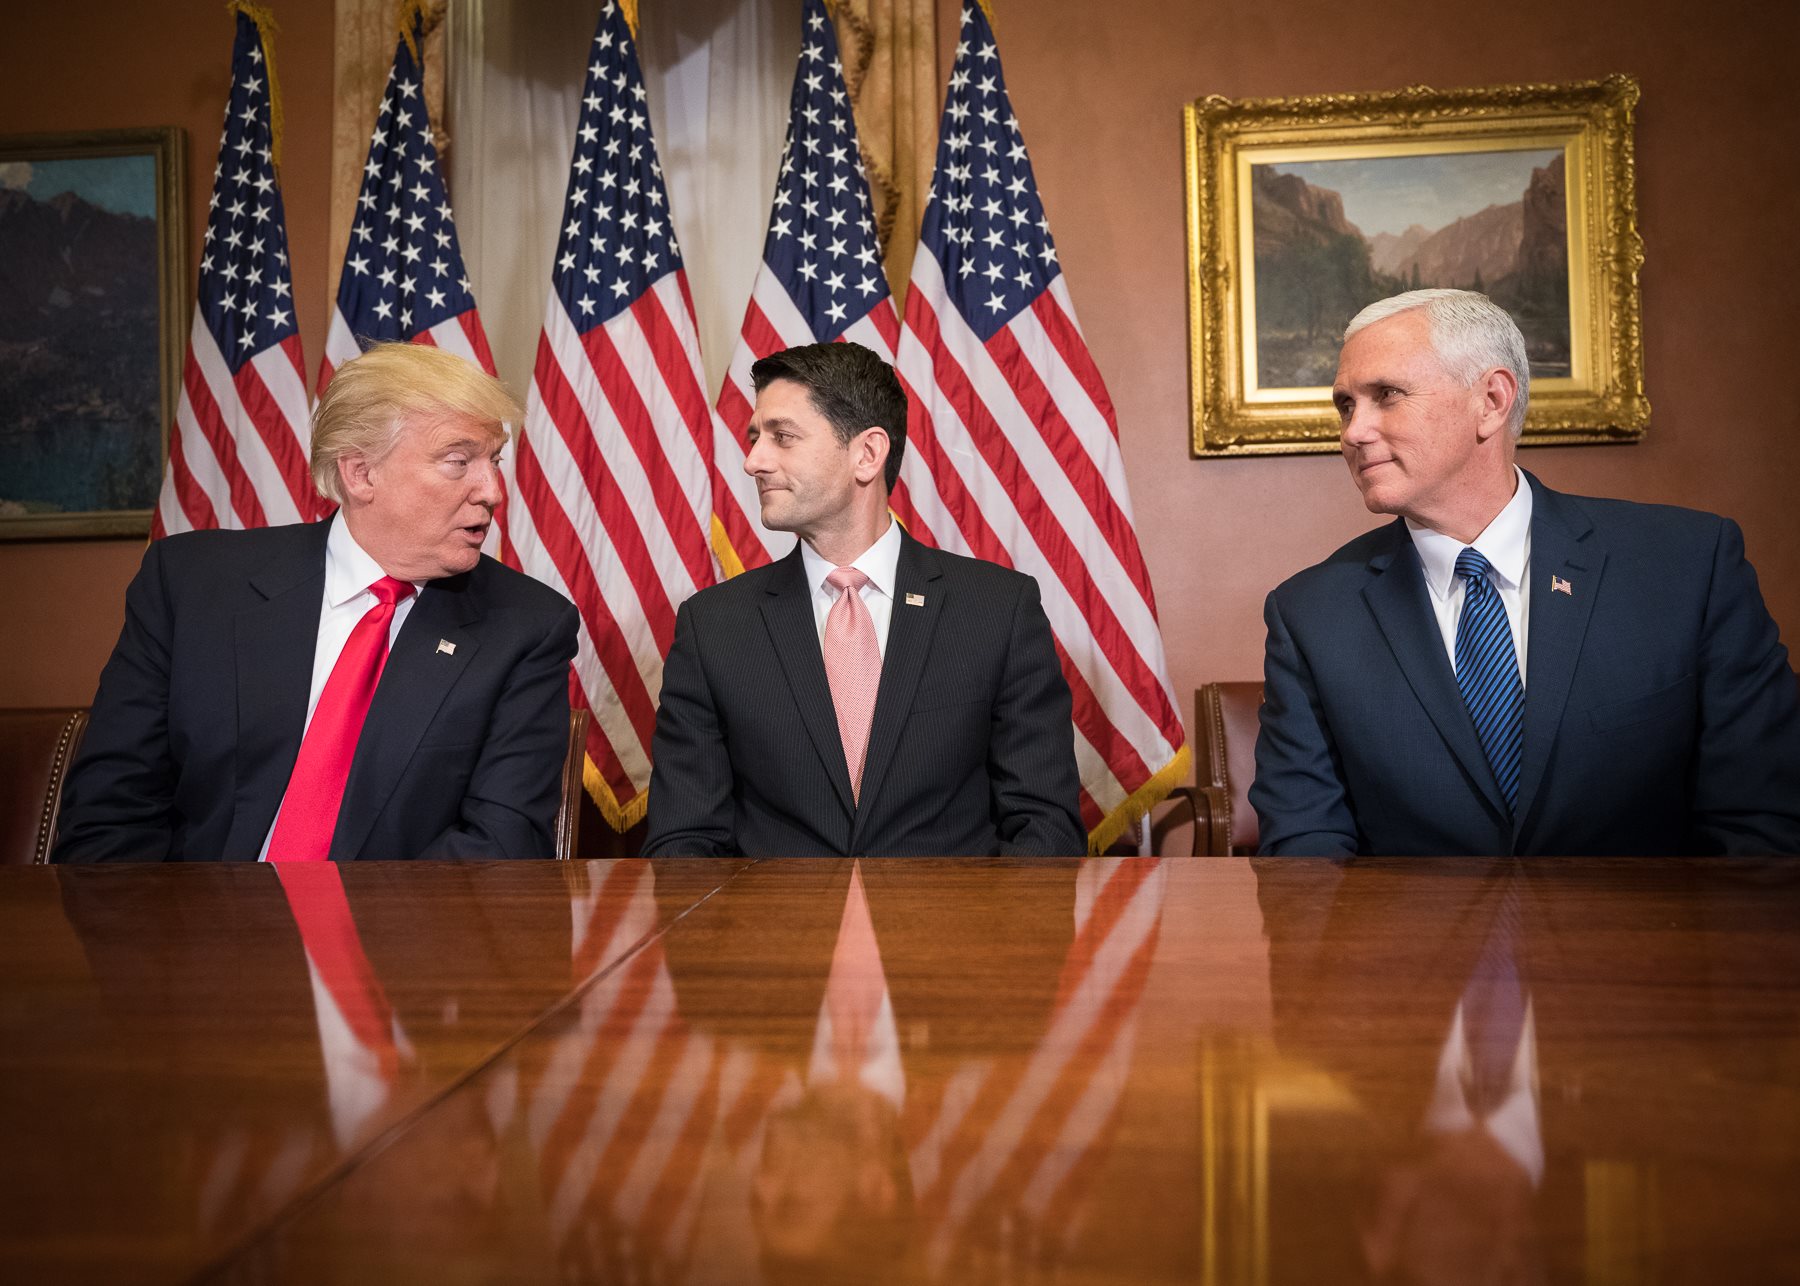 Donald Trump, Paul Ryan, and Mike Pence sitting at a table.